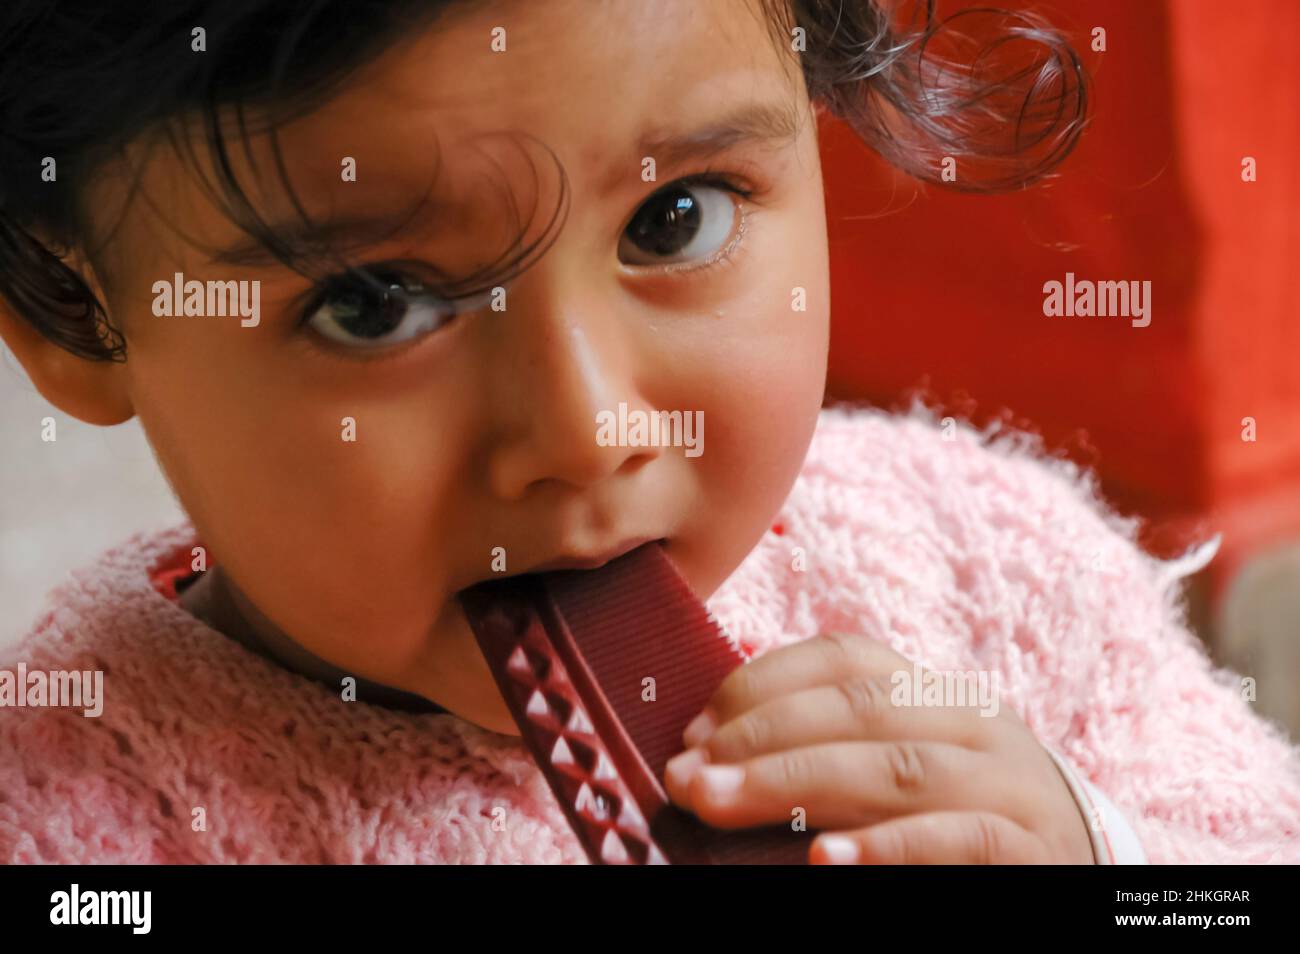 A portrait of an East Indian baby boy / child / kid showing signs of teething by chewing on a plastic comb. Stock Photo